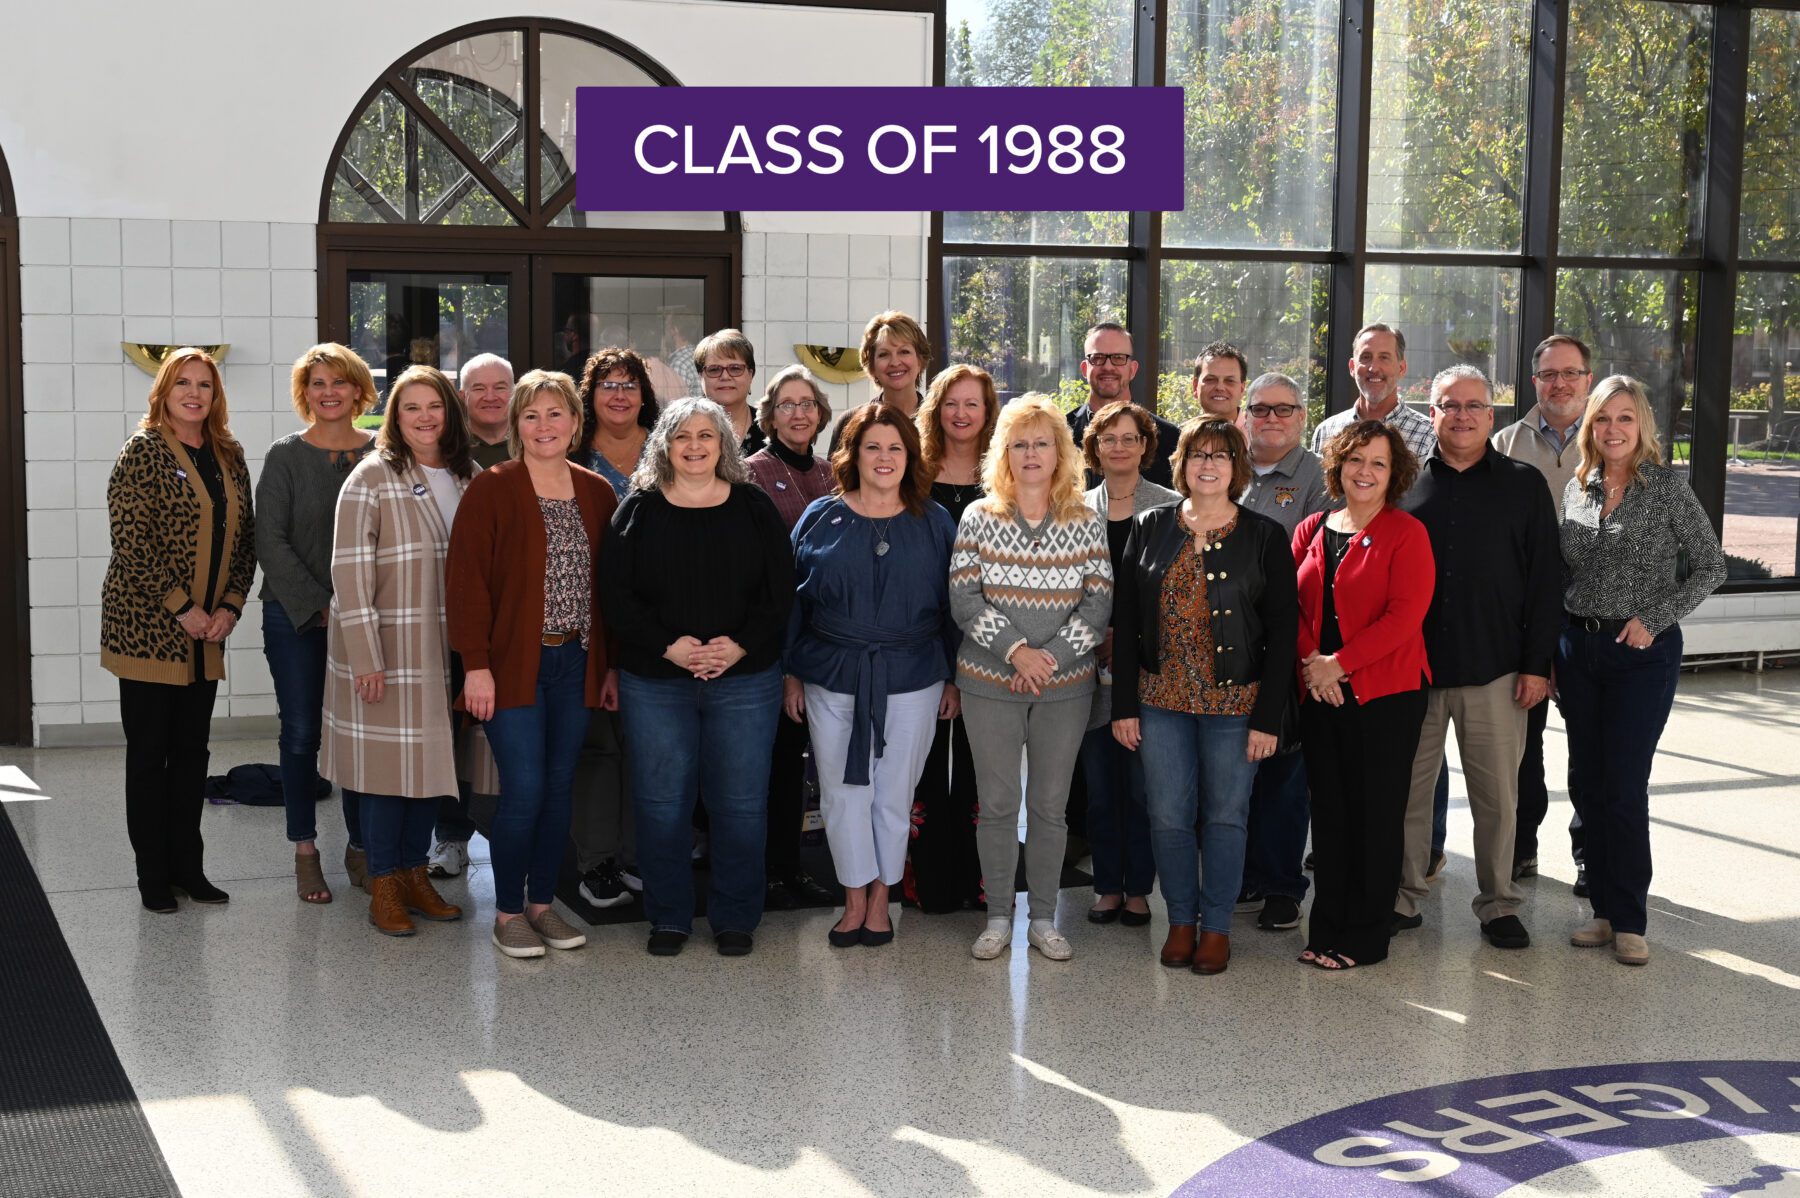 Those who came for the class reunion of 1988 pose for a group photo